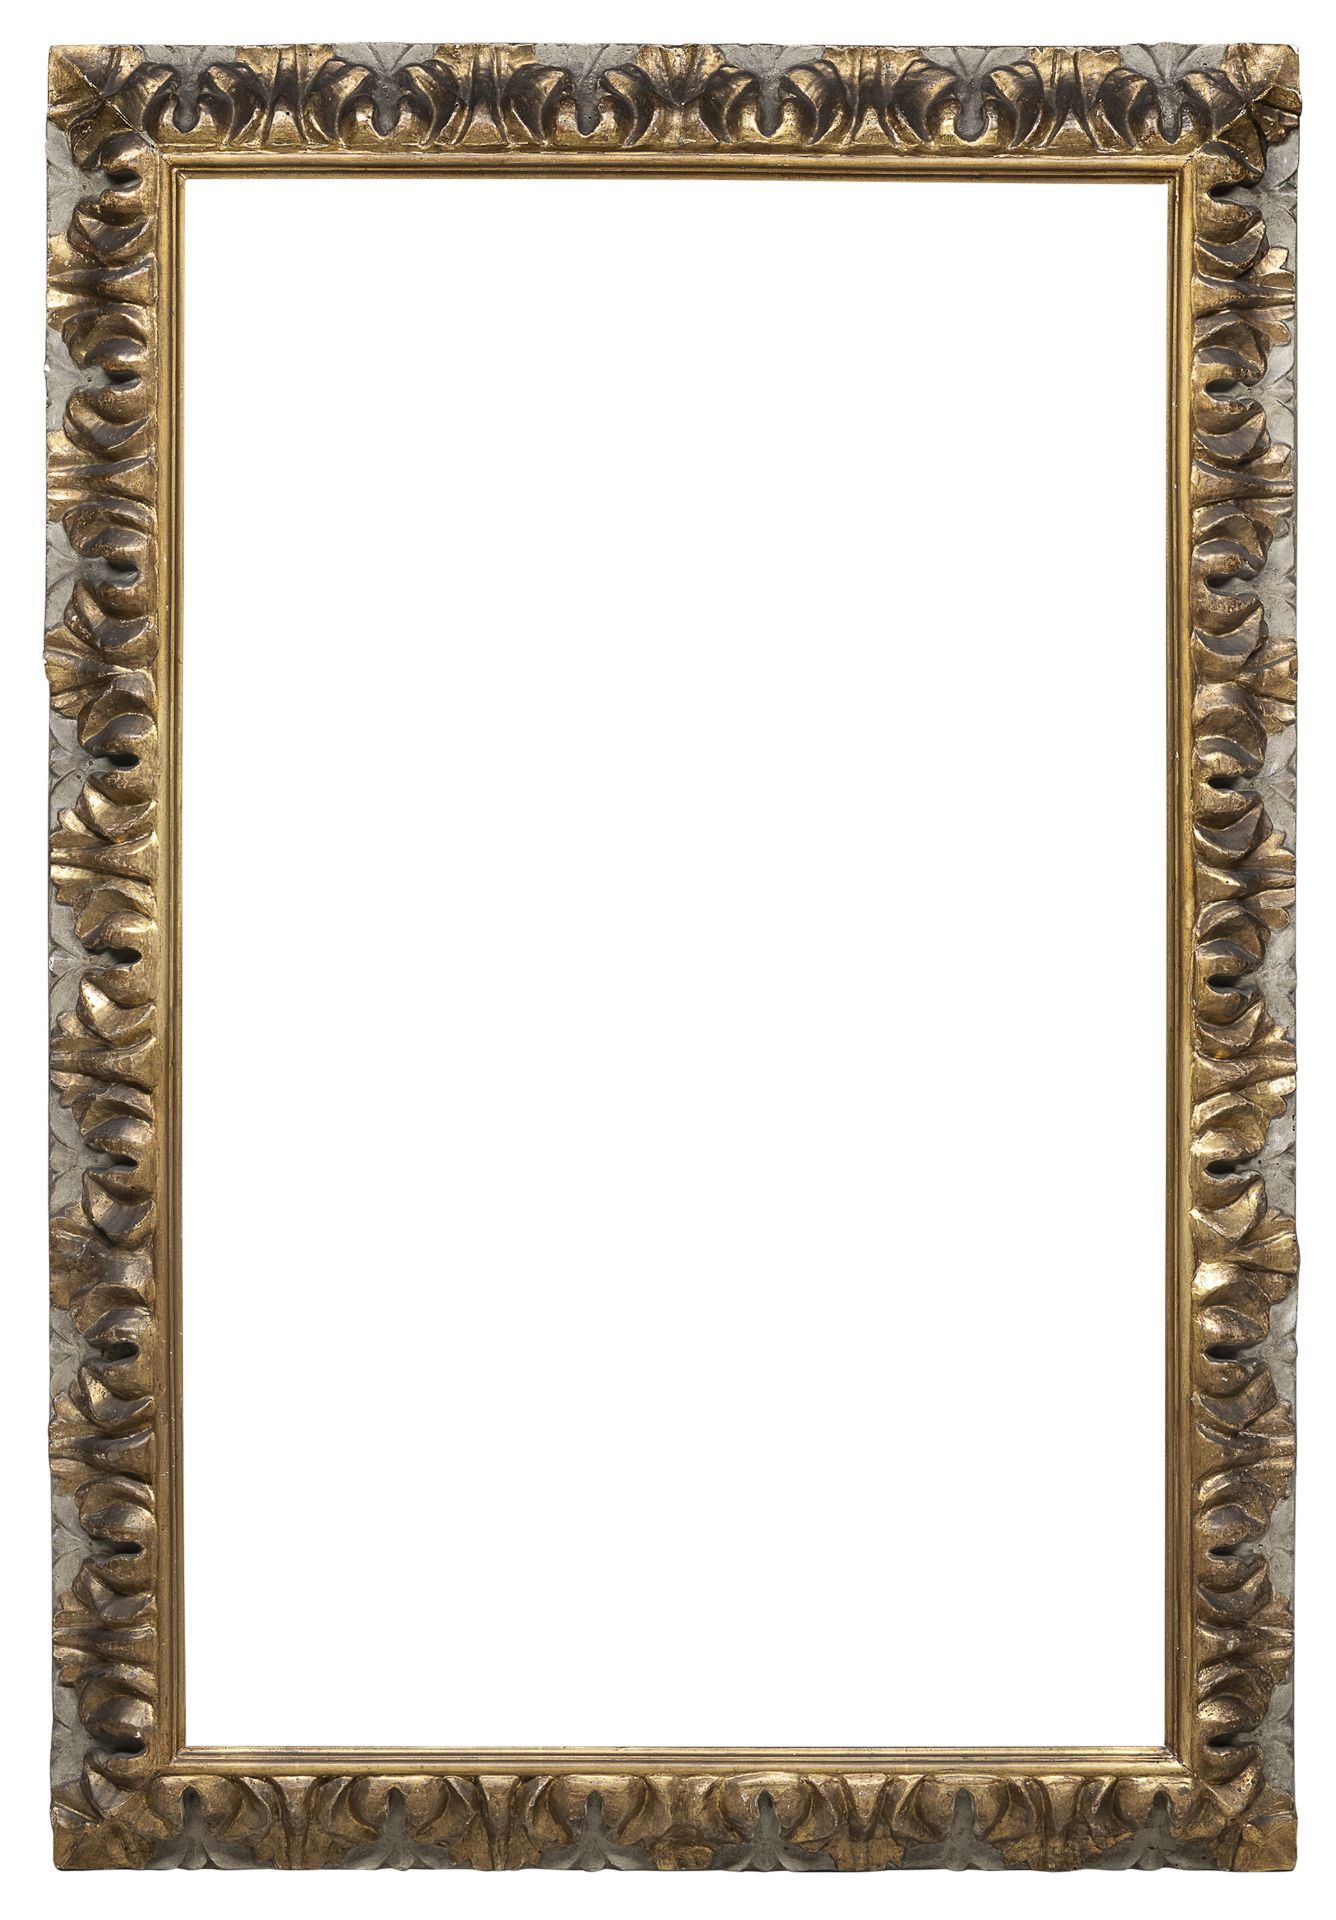 LACQUERED AND GILT WOOD FRAME 19TH CENTURY